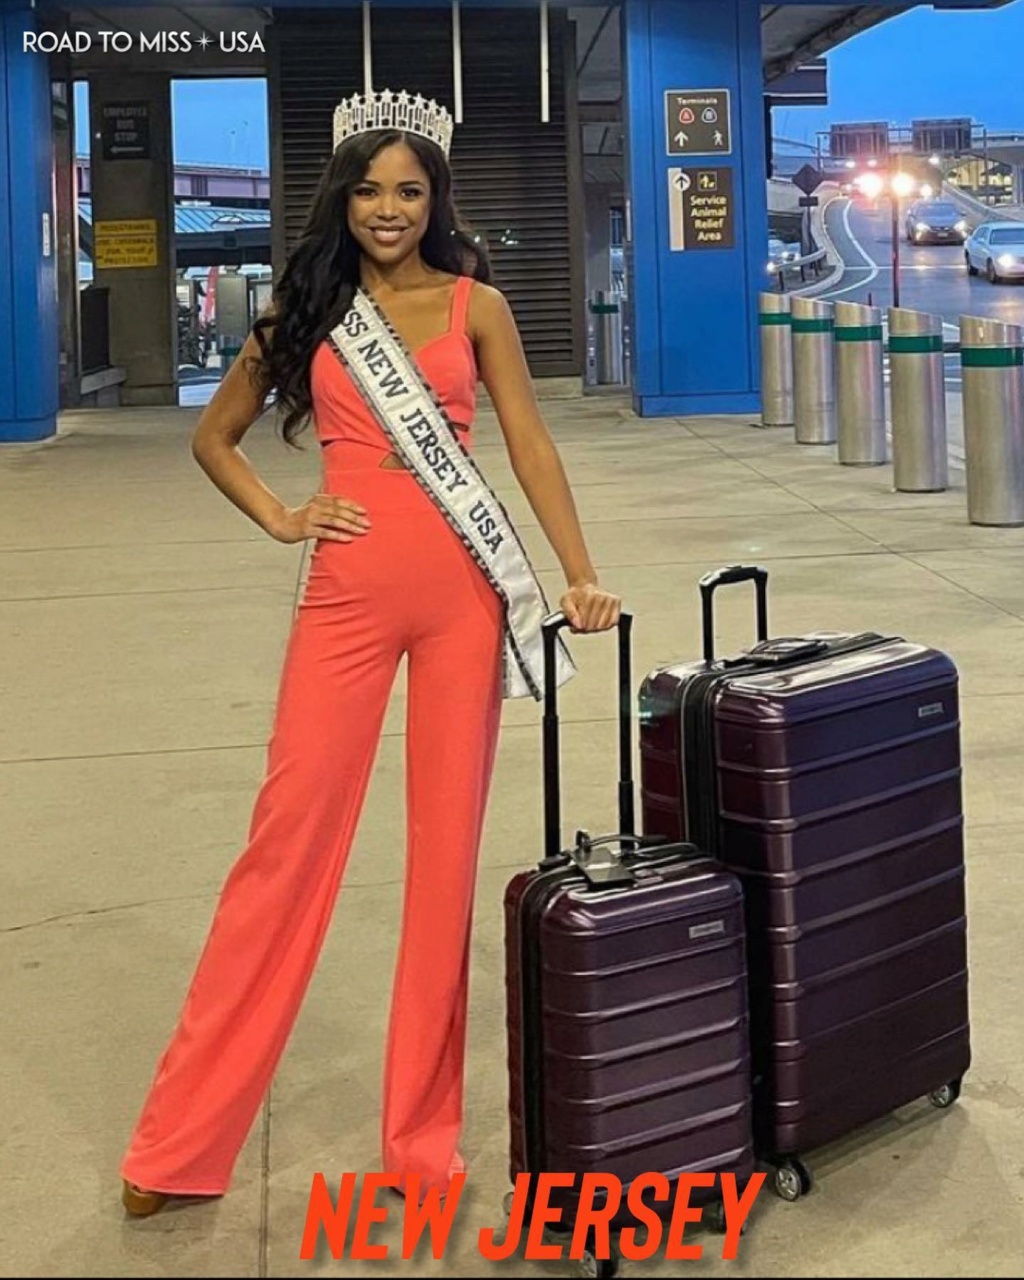 ROAD TO MISS USA 2021 is KENTUCKY! - Page 3 24021111